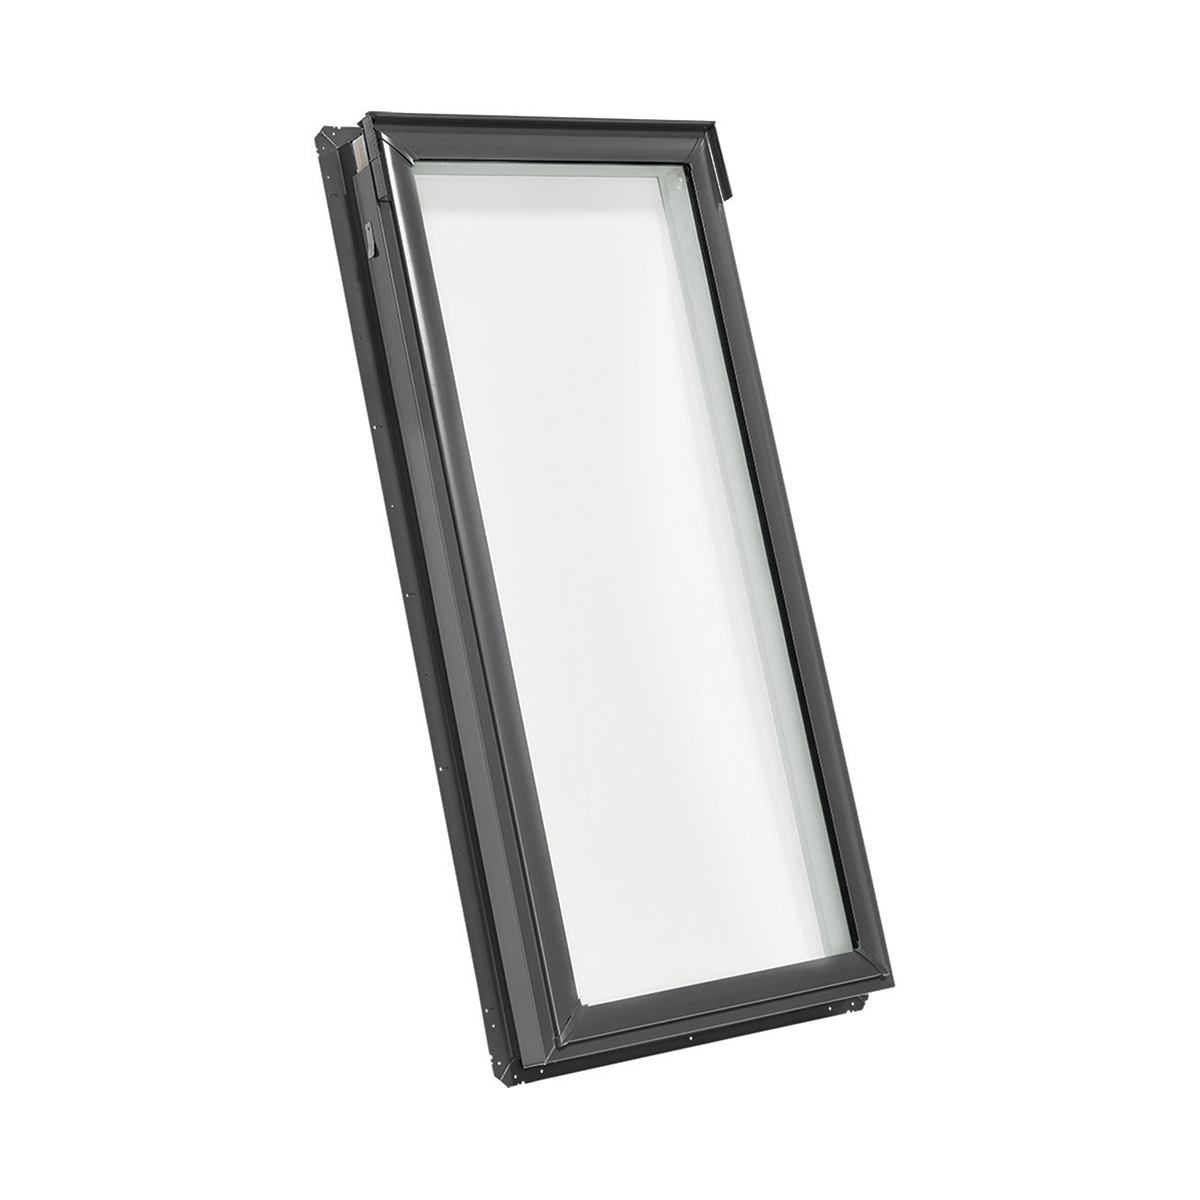 Fixed Deck-Mount Skylight with Laminated Low-E3 Glass - 30-1/16 in. x 30 in. - FS M02